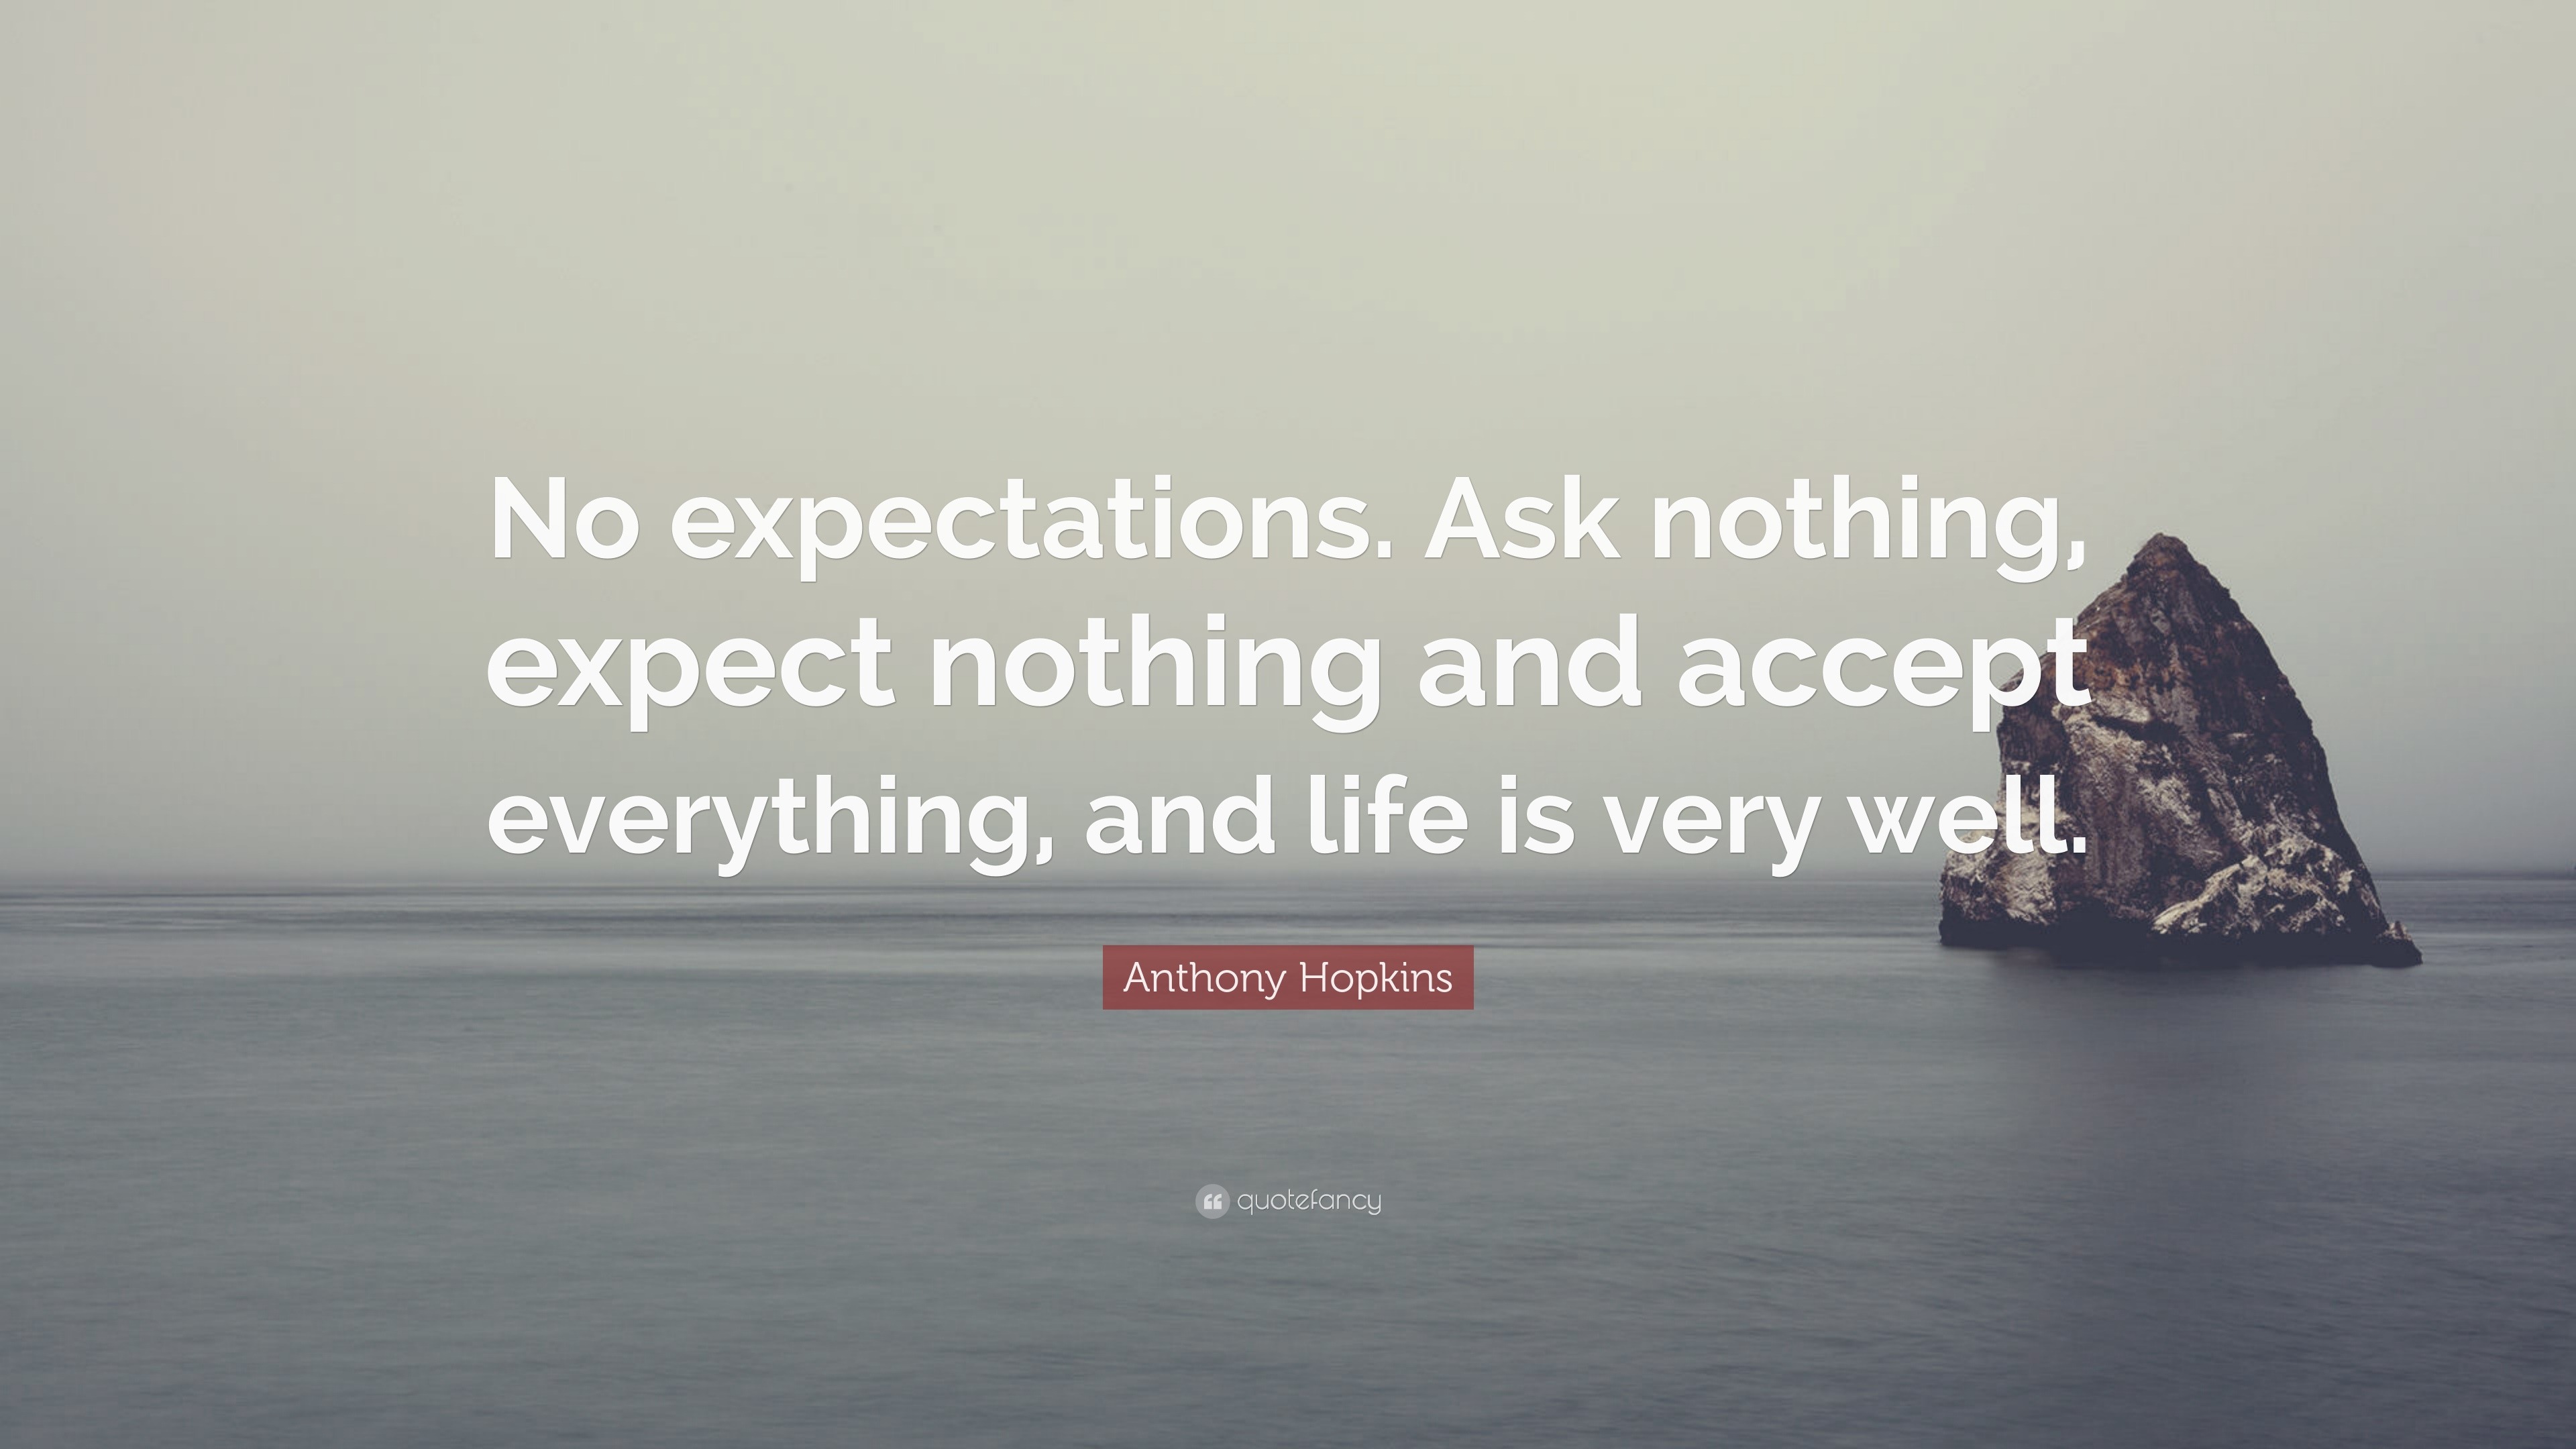 Anthony Hopkins Quote: “No expectations. Ask nothing, expect nothing ...